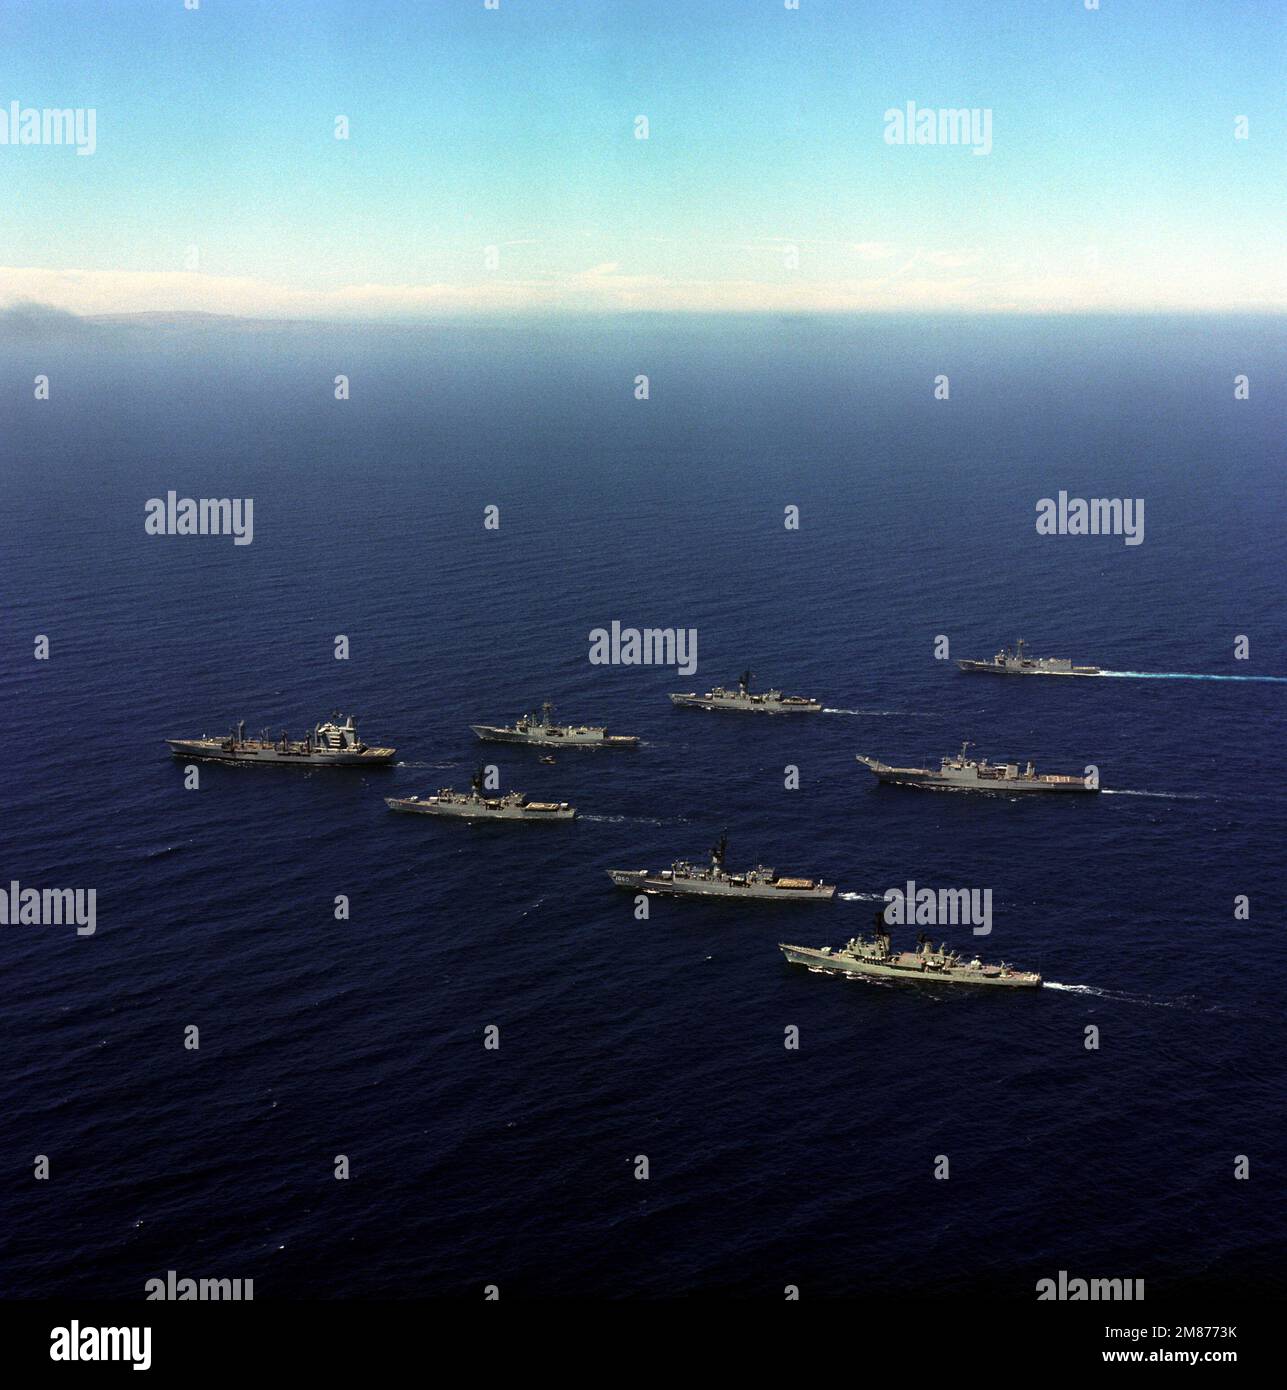 An aerial view of a US Navy (USN) parade formation underway. The ships include, clockwise starting at lower right: USN Farragut Class Guided Missile Destroyer USS MACDONOUGH (DDG 39), USN Knox Class Frigate USS GRAY (FF 1054), USN Cimarron Class Oiler USS WILLAMETTE (AO 180) (leading) USN Oliver Hazard Perry Class Frigate USS DUNCAN (FFG 10), USN Knox Class Frigate USS STEIN (FF 1065), USN Oliver Hazard Perry Class Frigate USS WADSWORTH (FFG 9) and in center the USN Newport Class Tank Landing Ship USS RACINE (LST 1191). In flight is a SH-2F Seasprite helicopter. (Exact Date Shot Unknown). Coun Stock Photo